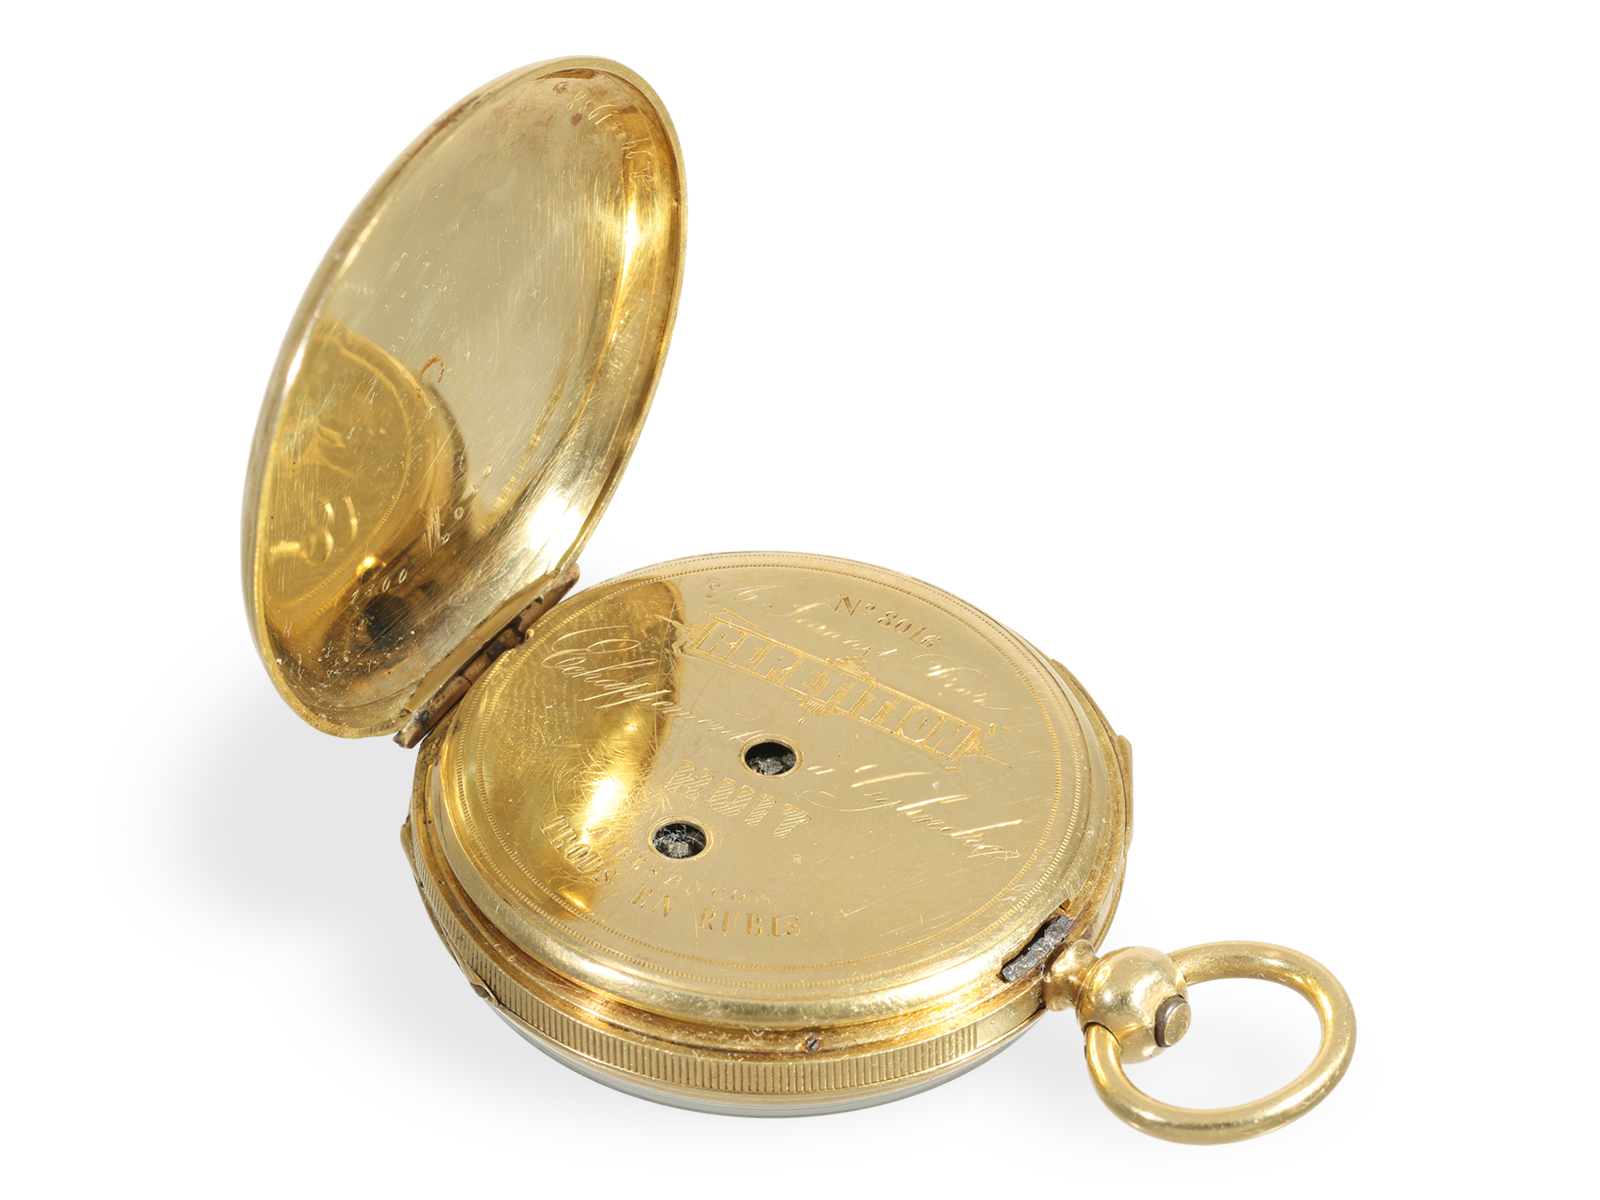 Pocket watch: very rare ladies' pocket watch with repeater, Jeannot Droz a Besancon ca. 1850 - Image 6 of 7